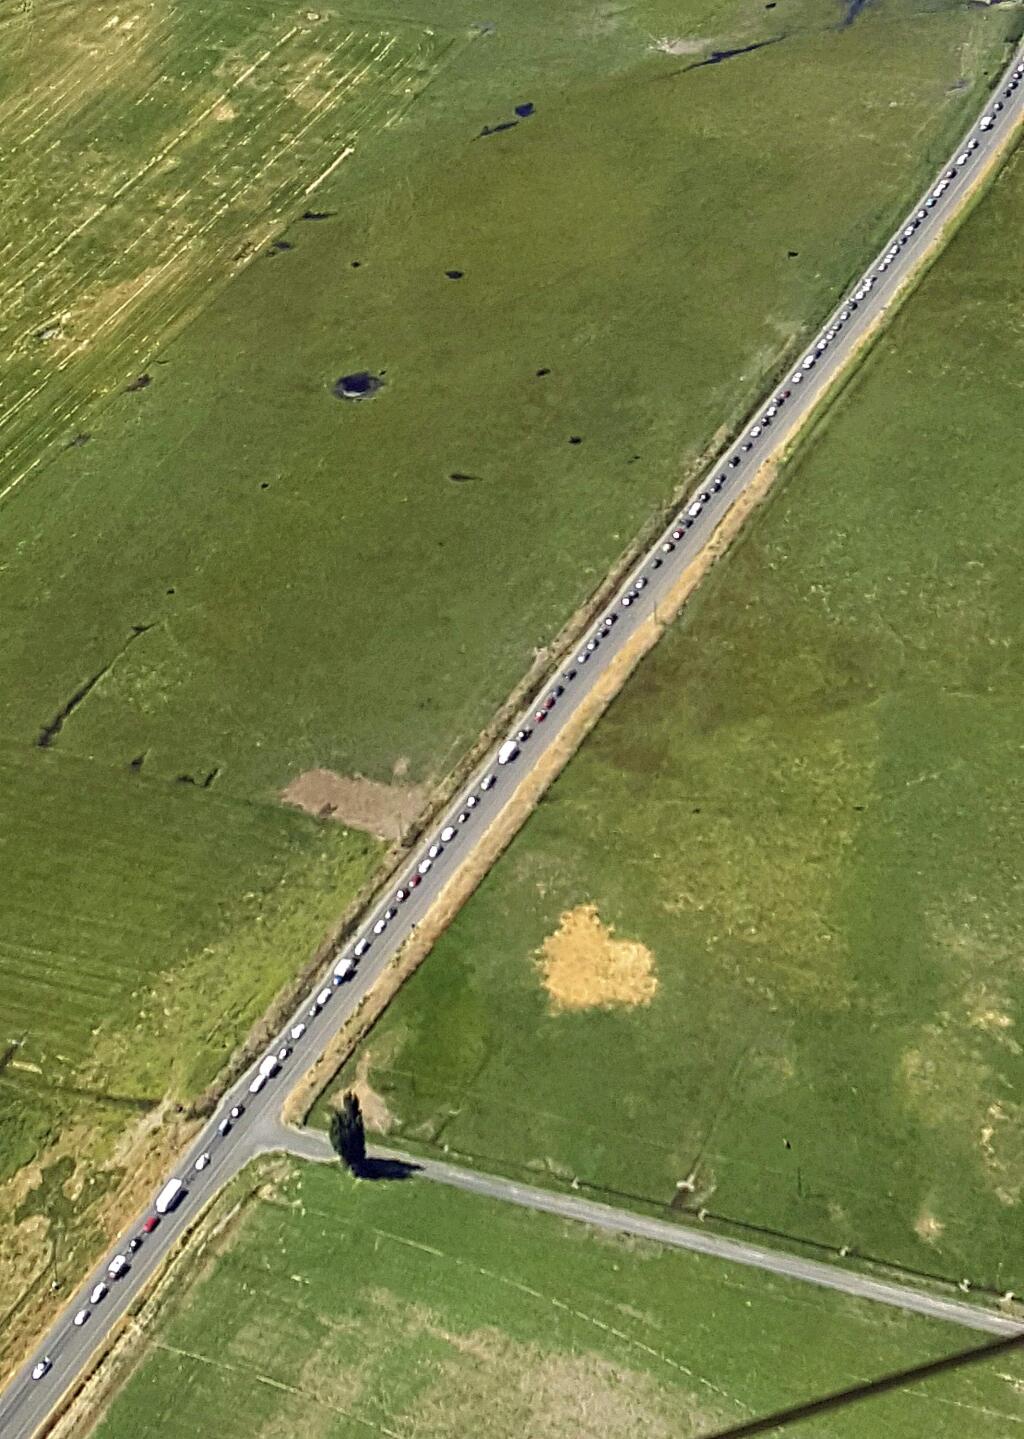 This aerial photo provided by the Oregon State Police shows a 15-mile traffic jam on Highway 26 heading in to Prineville, Ore., Thursday, Aug. 17, 2017. Traffic is already a headache in central Oregon as thousands of people are arriving before Monday's total solar eclipse. (Oregon State Police via AP)